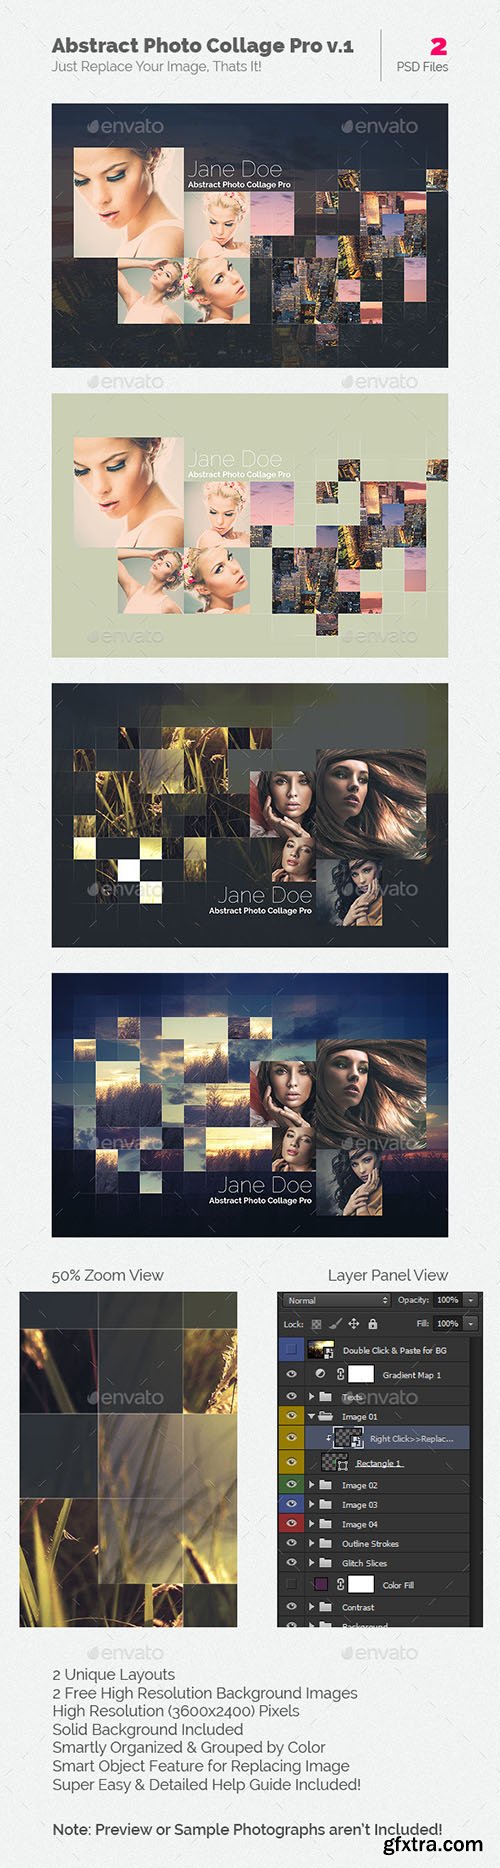 GraphicRiver - Abstract Photo Collage Pro v.1 10978512